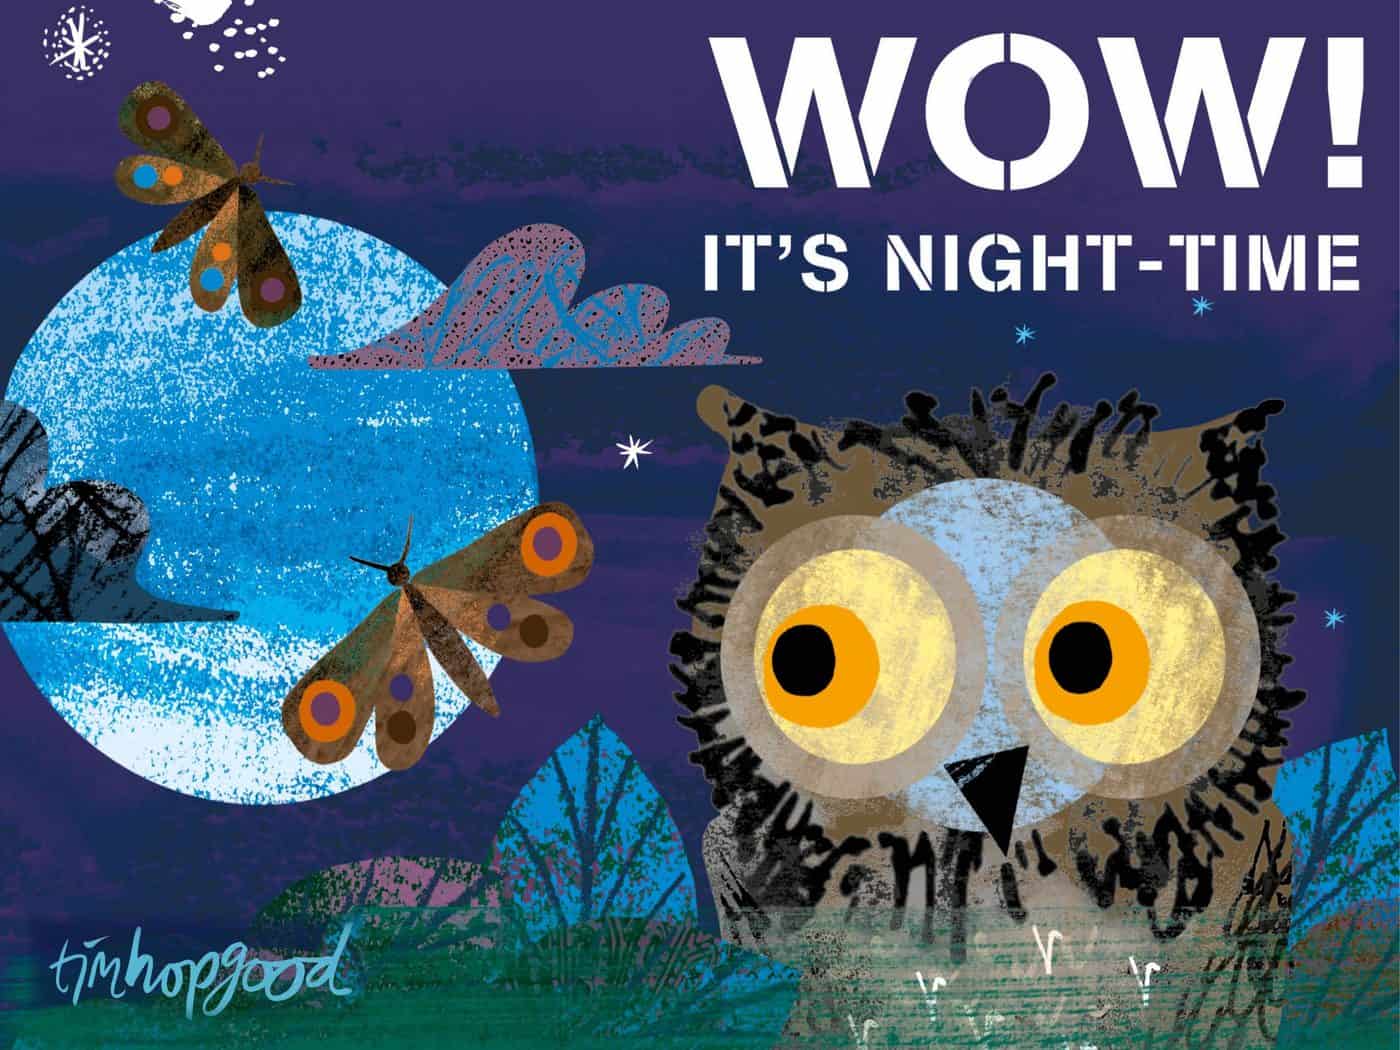 WOW! it's night-time